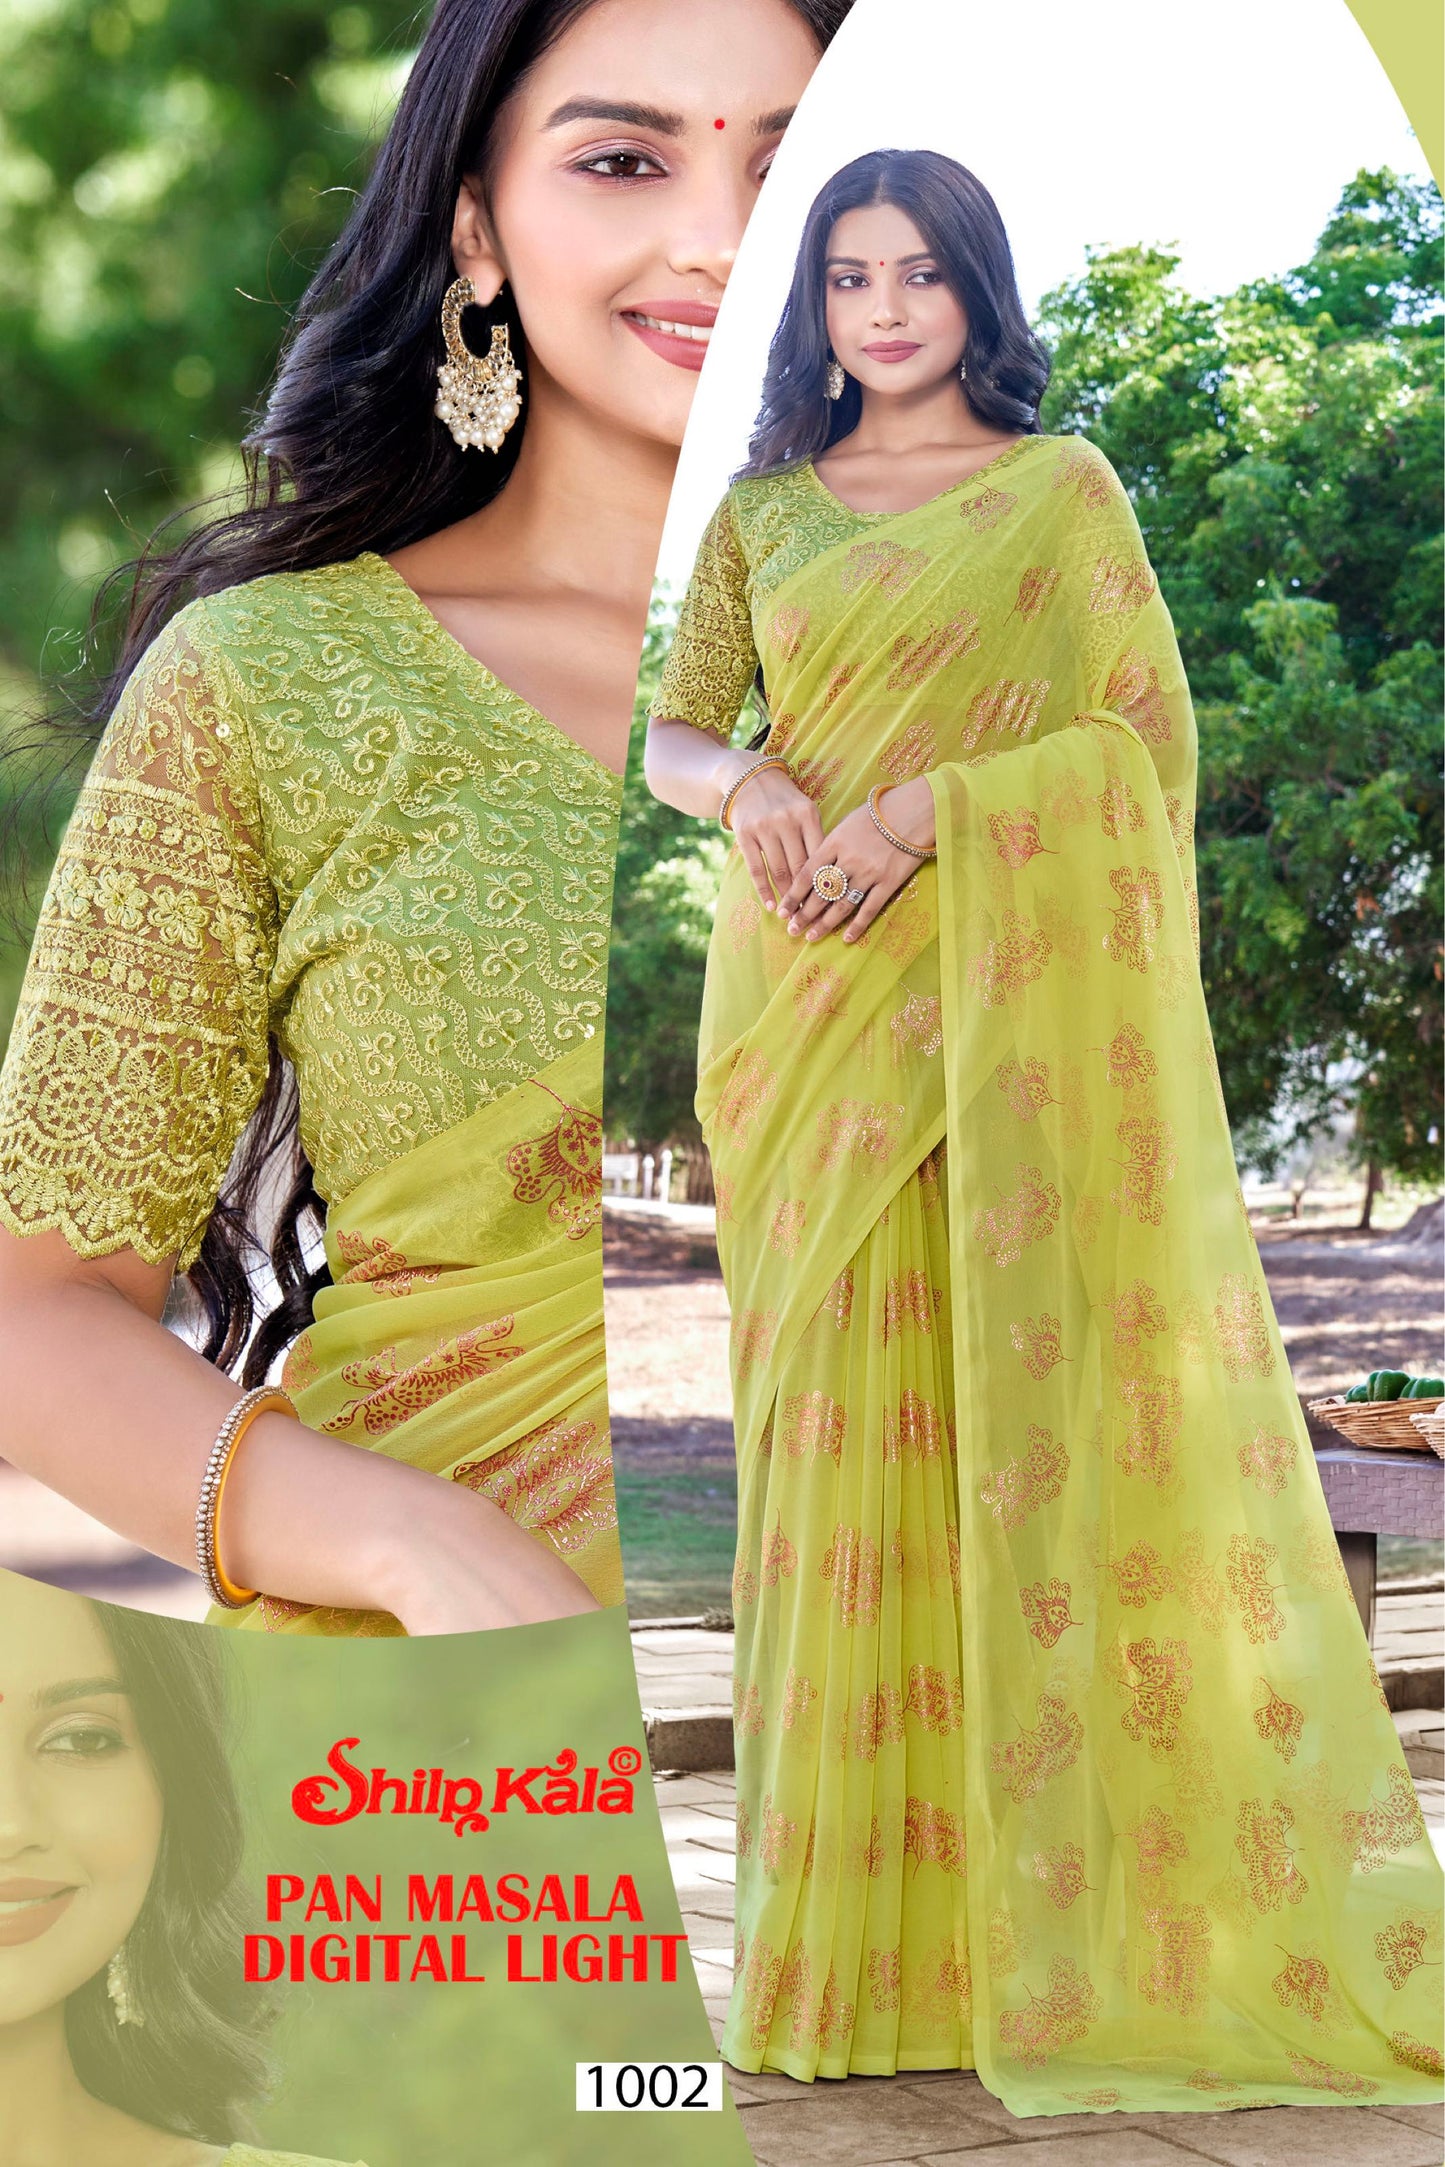 Pan Multicolour Georgette Saree with Copper Printing and Tone to Tone Matching